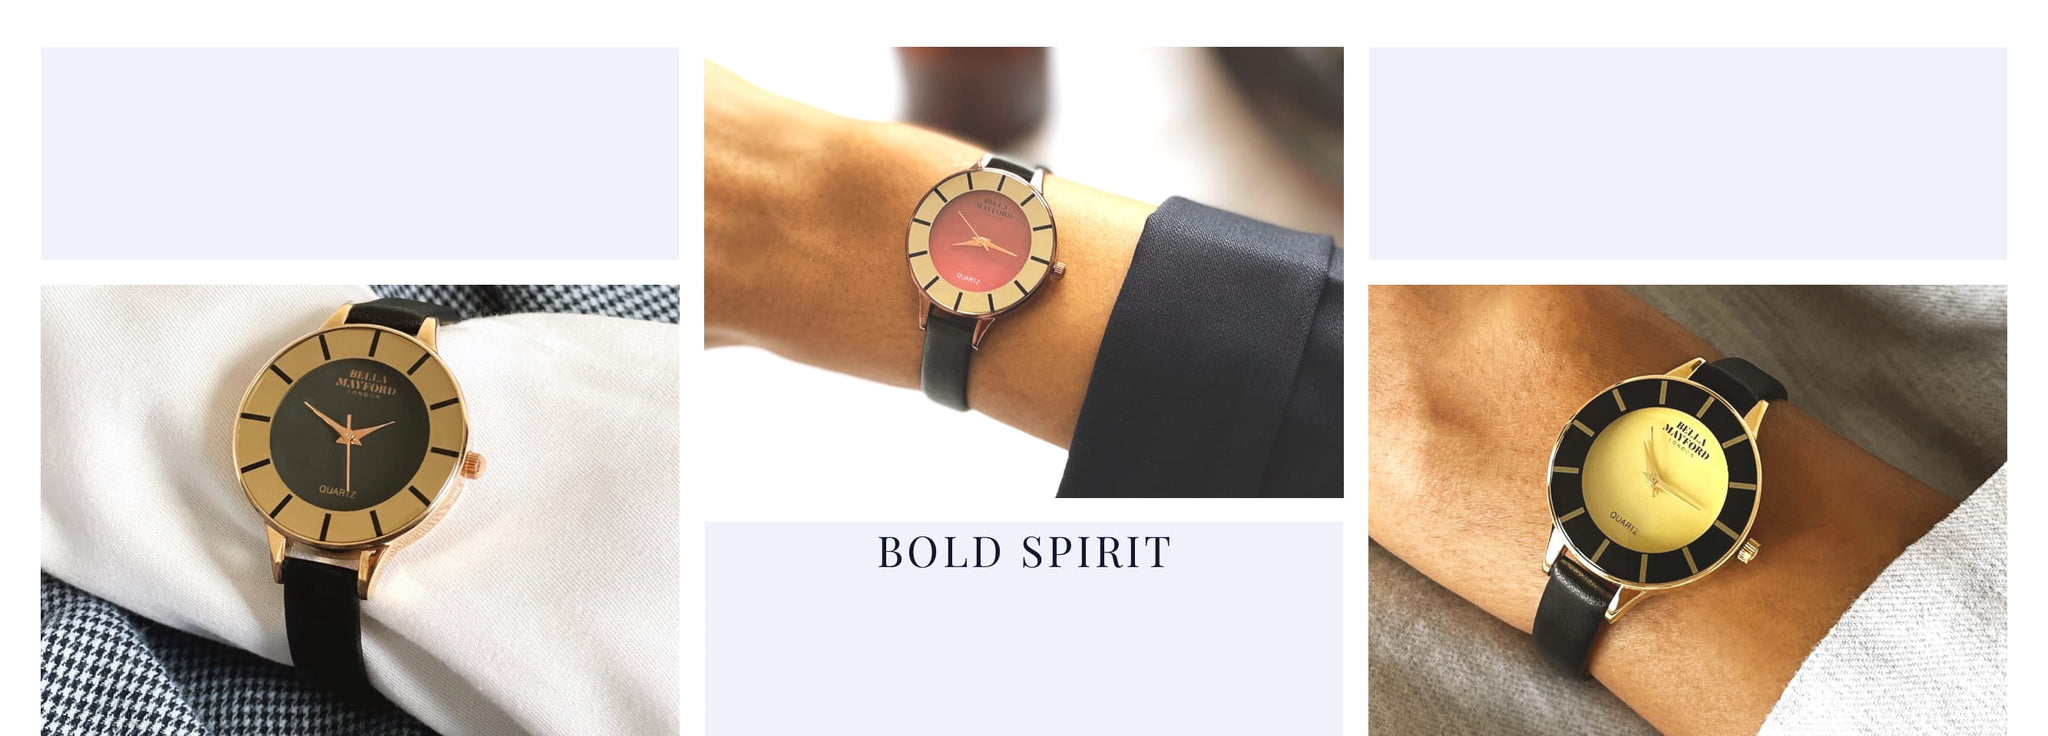 The Bold Spirit Watch Collection